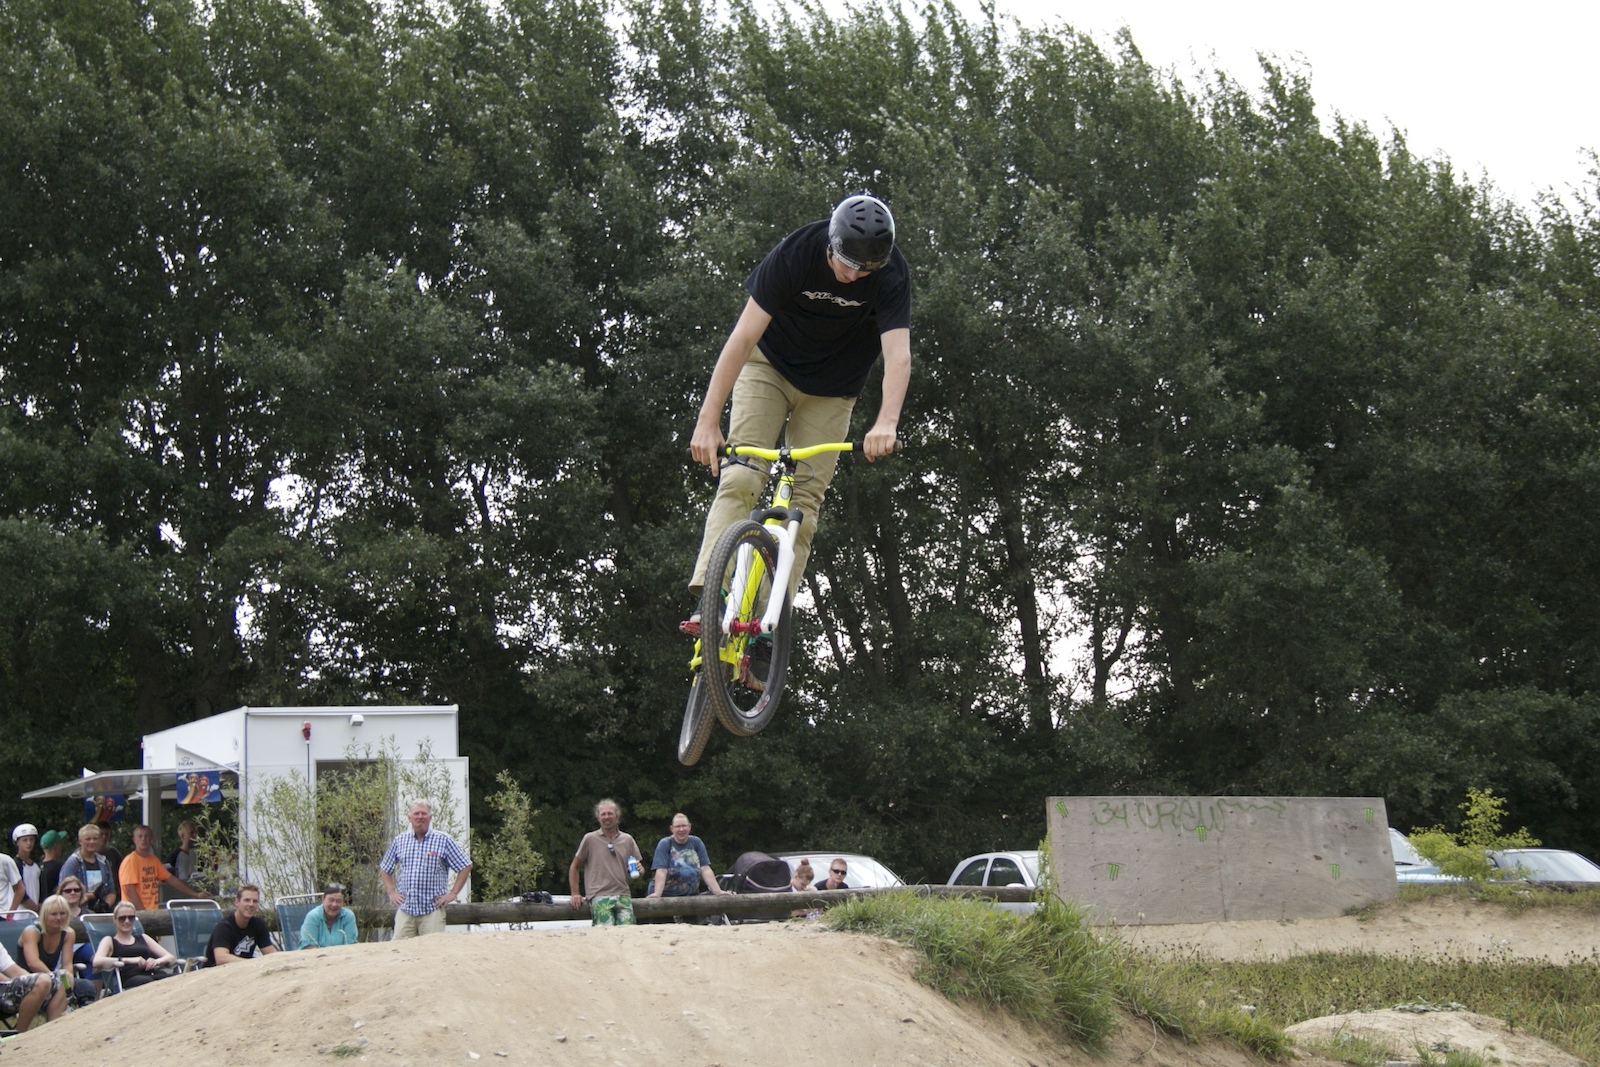 bad shot from the pump track race